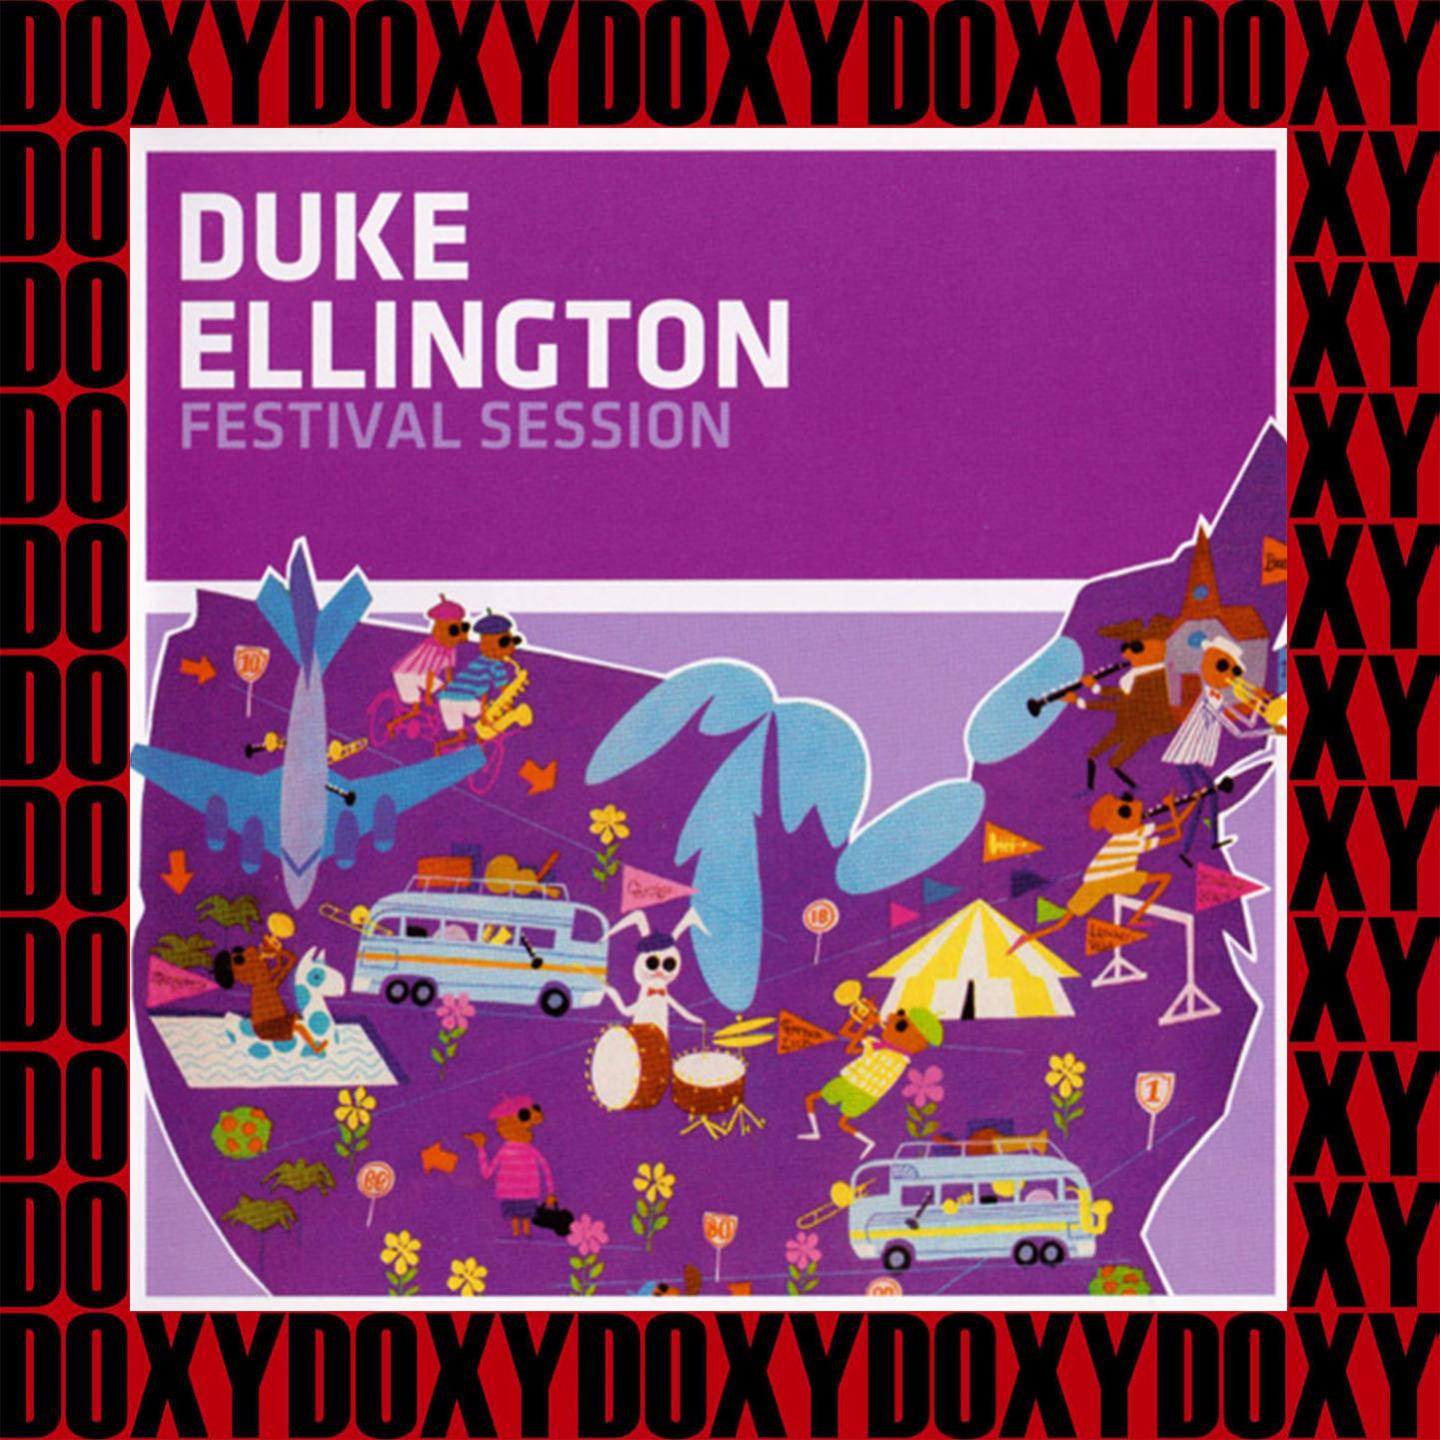 Festival Session (Expanded, Remastered Version) (Doxy Collection)